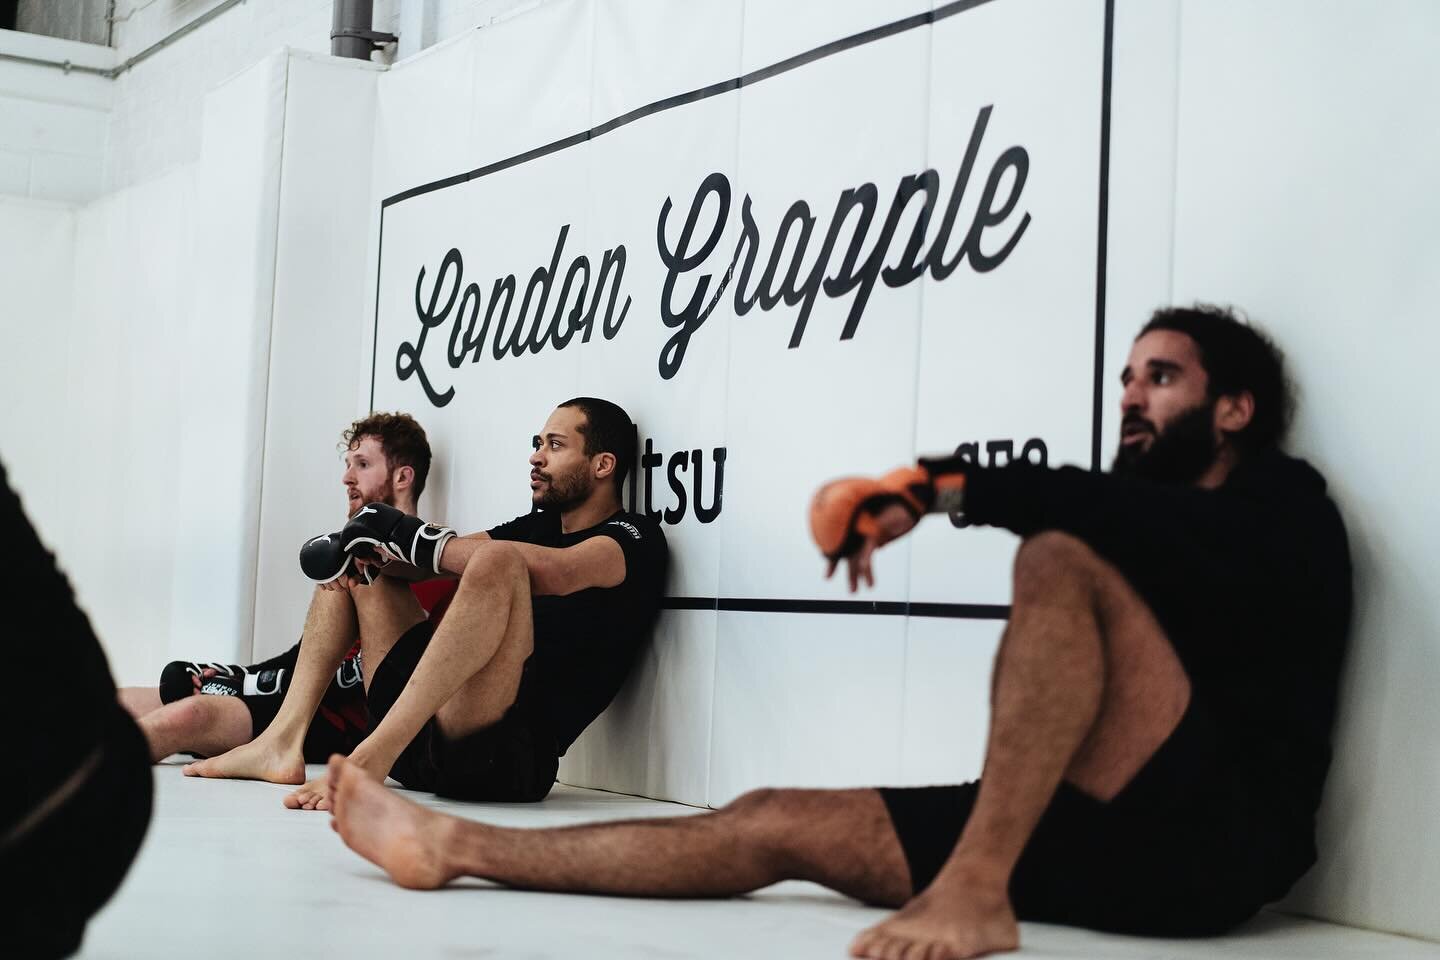 Beginners❗️

Our new and expanded timetable - launching April - has got you covered with various fundamental classes across all our martial arts programs 🤯👌

Weekly Fundamental sessions will include;

- Gi - 2 classes
- No Gi - 6 classes
- Wrestlin